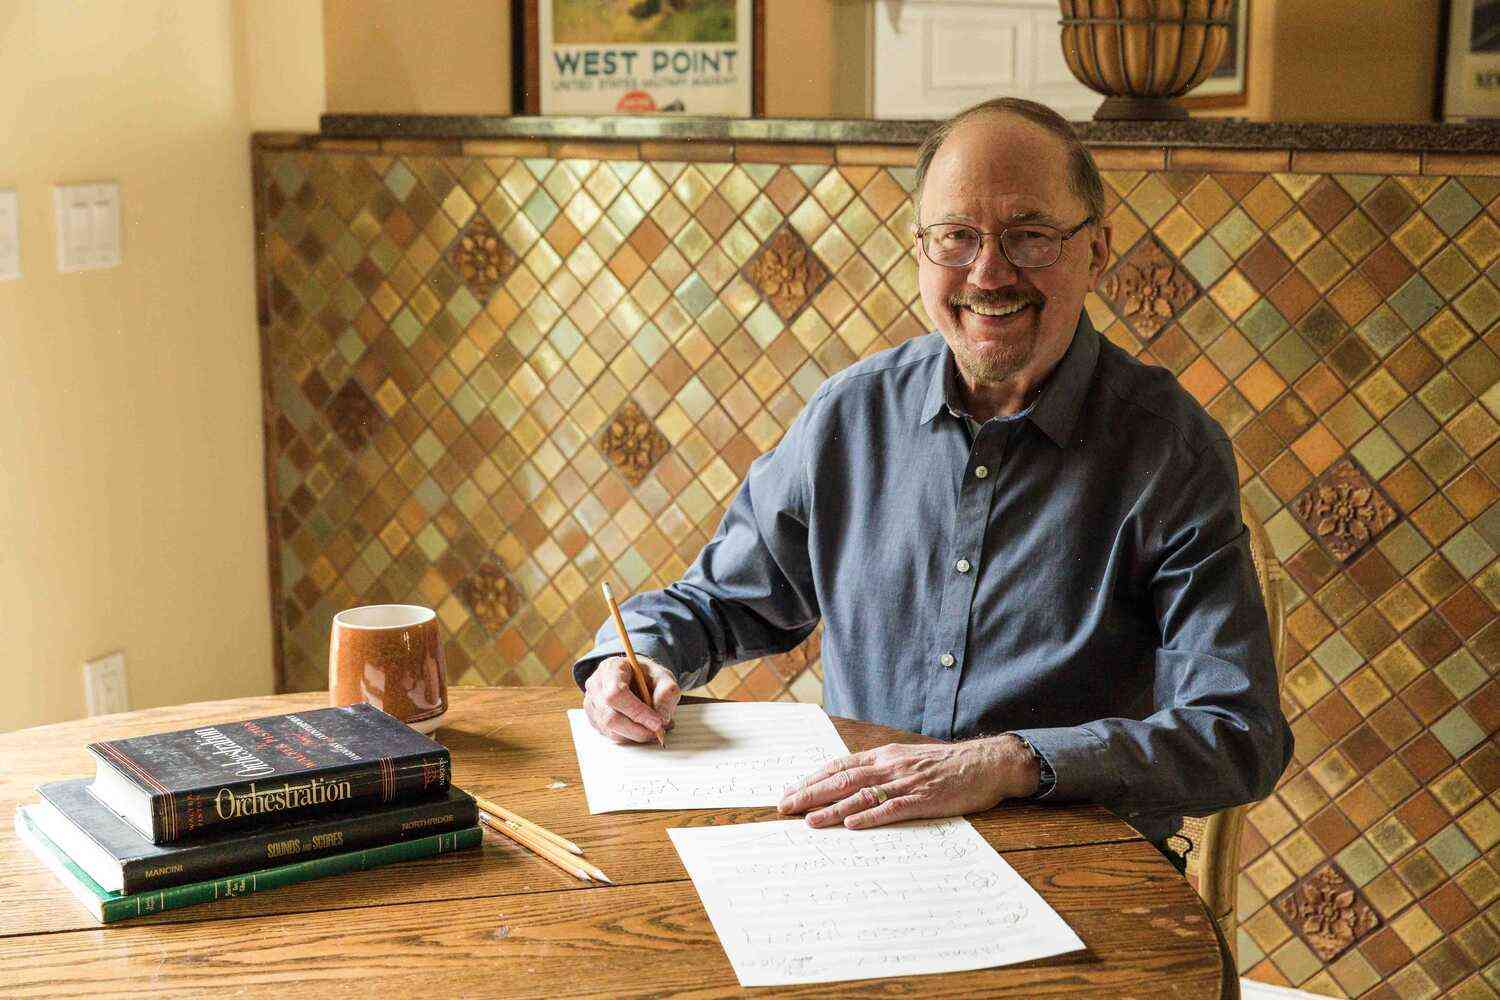 Robert Hudson, 86, Writes His Own “Hound of the Baskervilles”